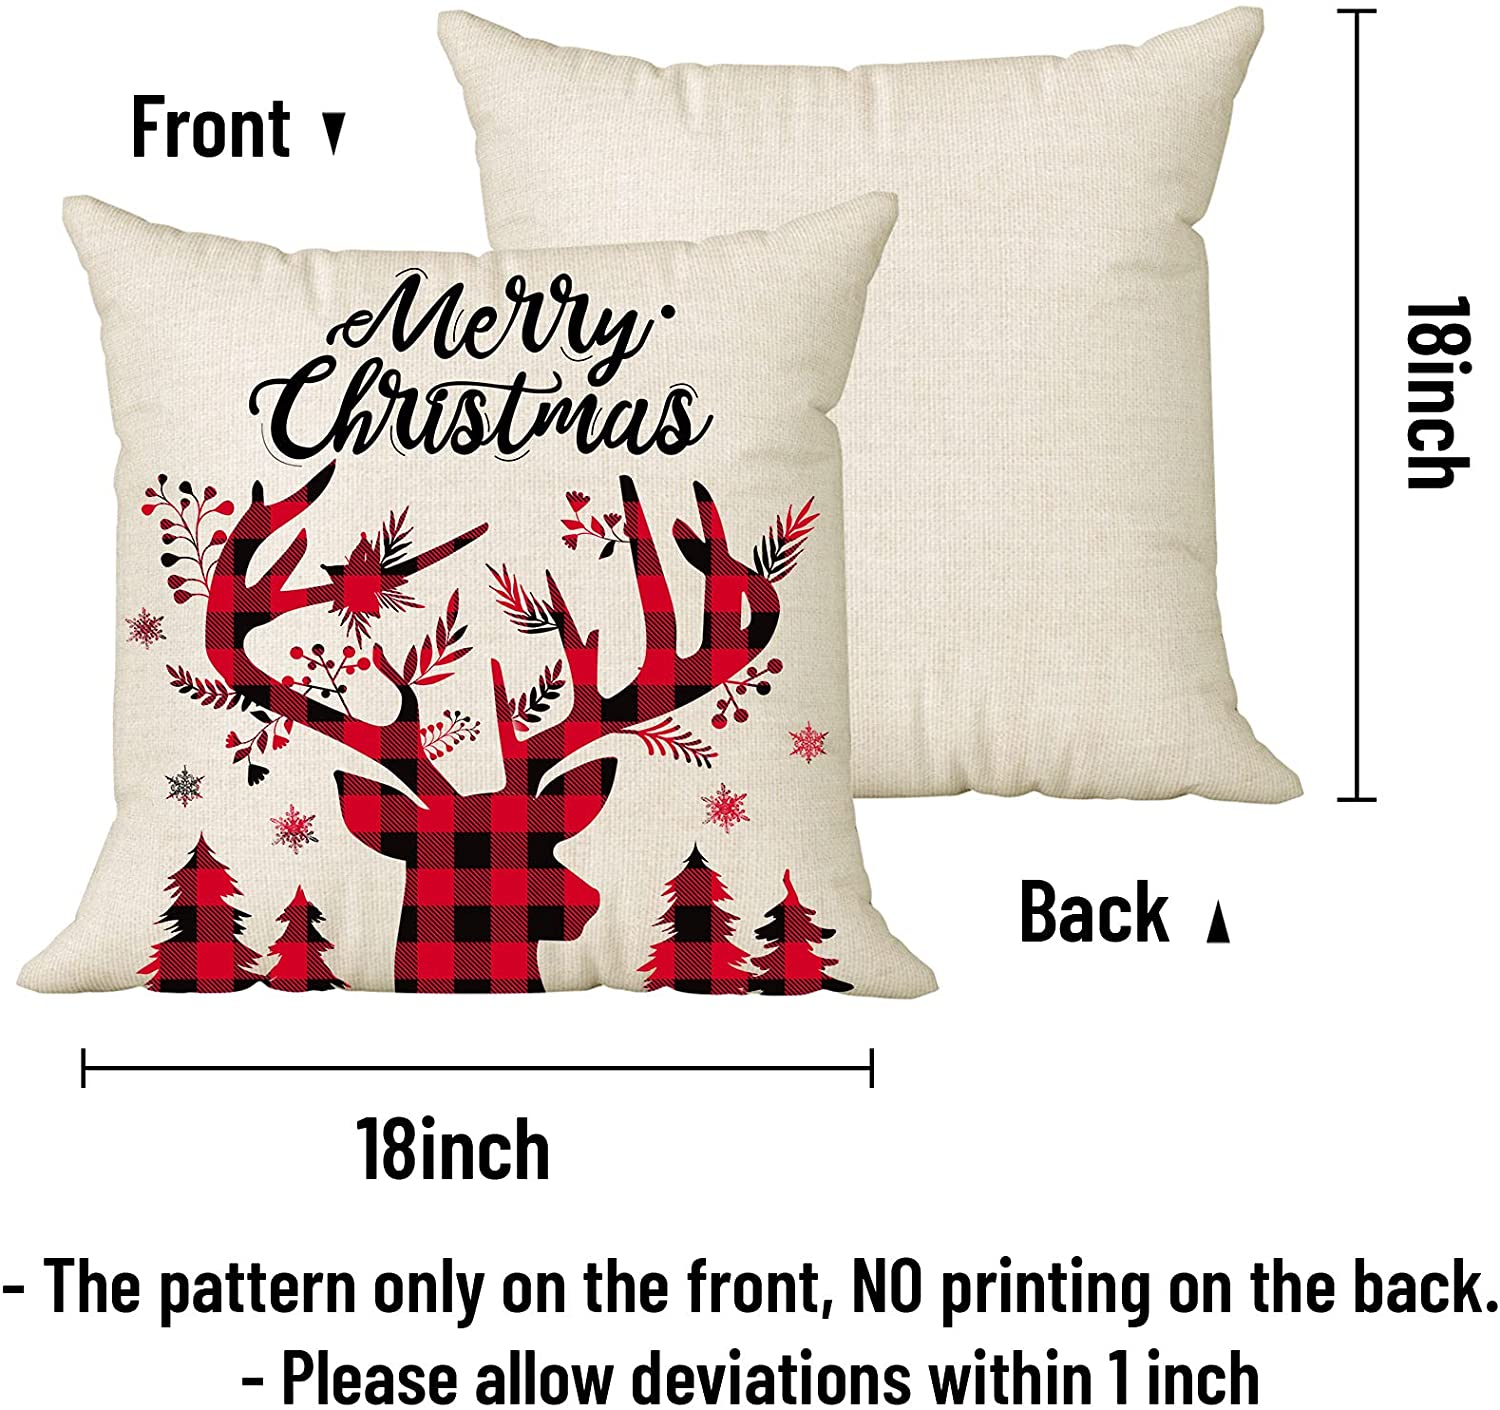 Set of 4 Rustic Christmas Pillow Covers 18 x 18 with 4 Bonus Coasters (Truck, Reindeer)